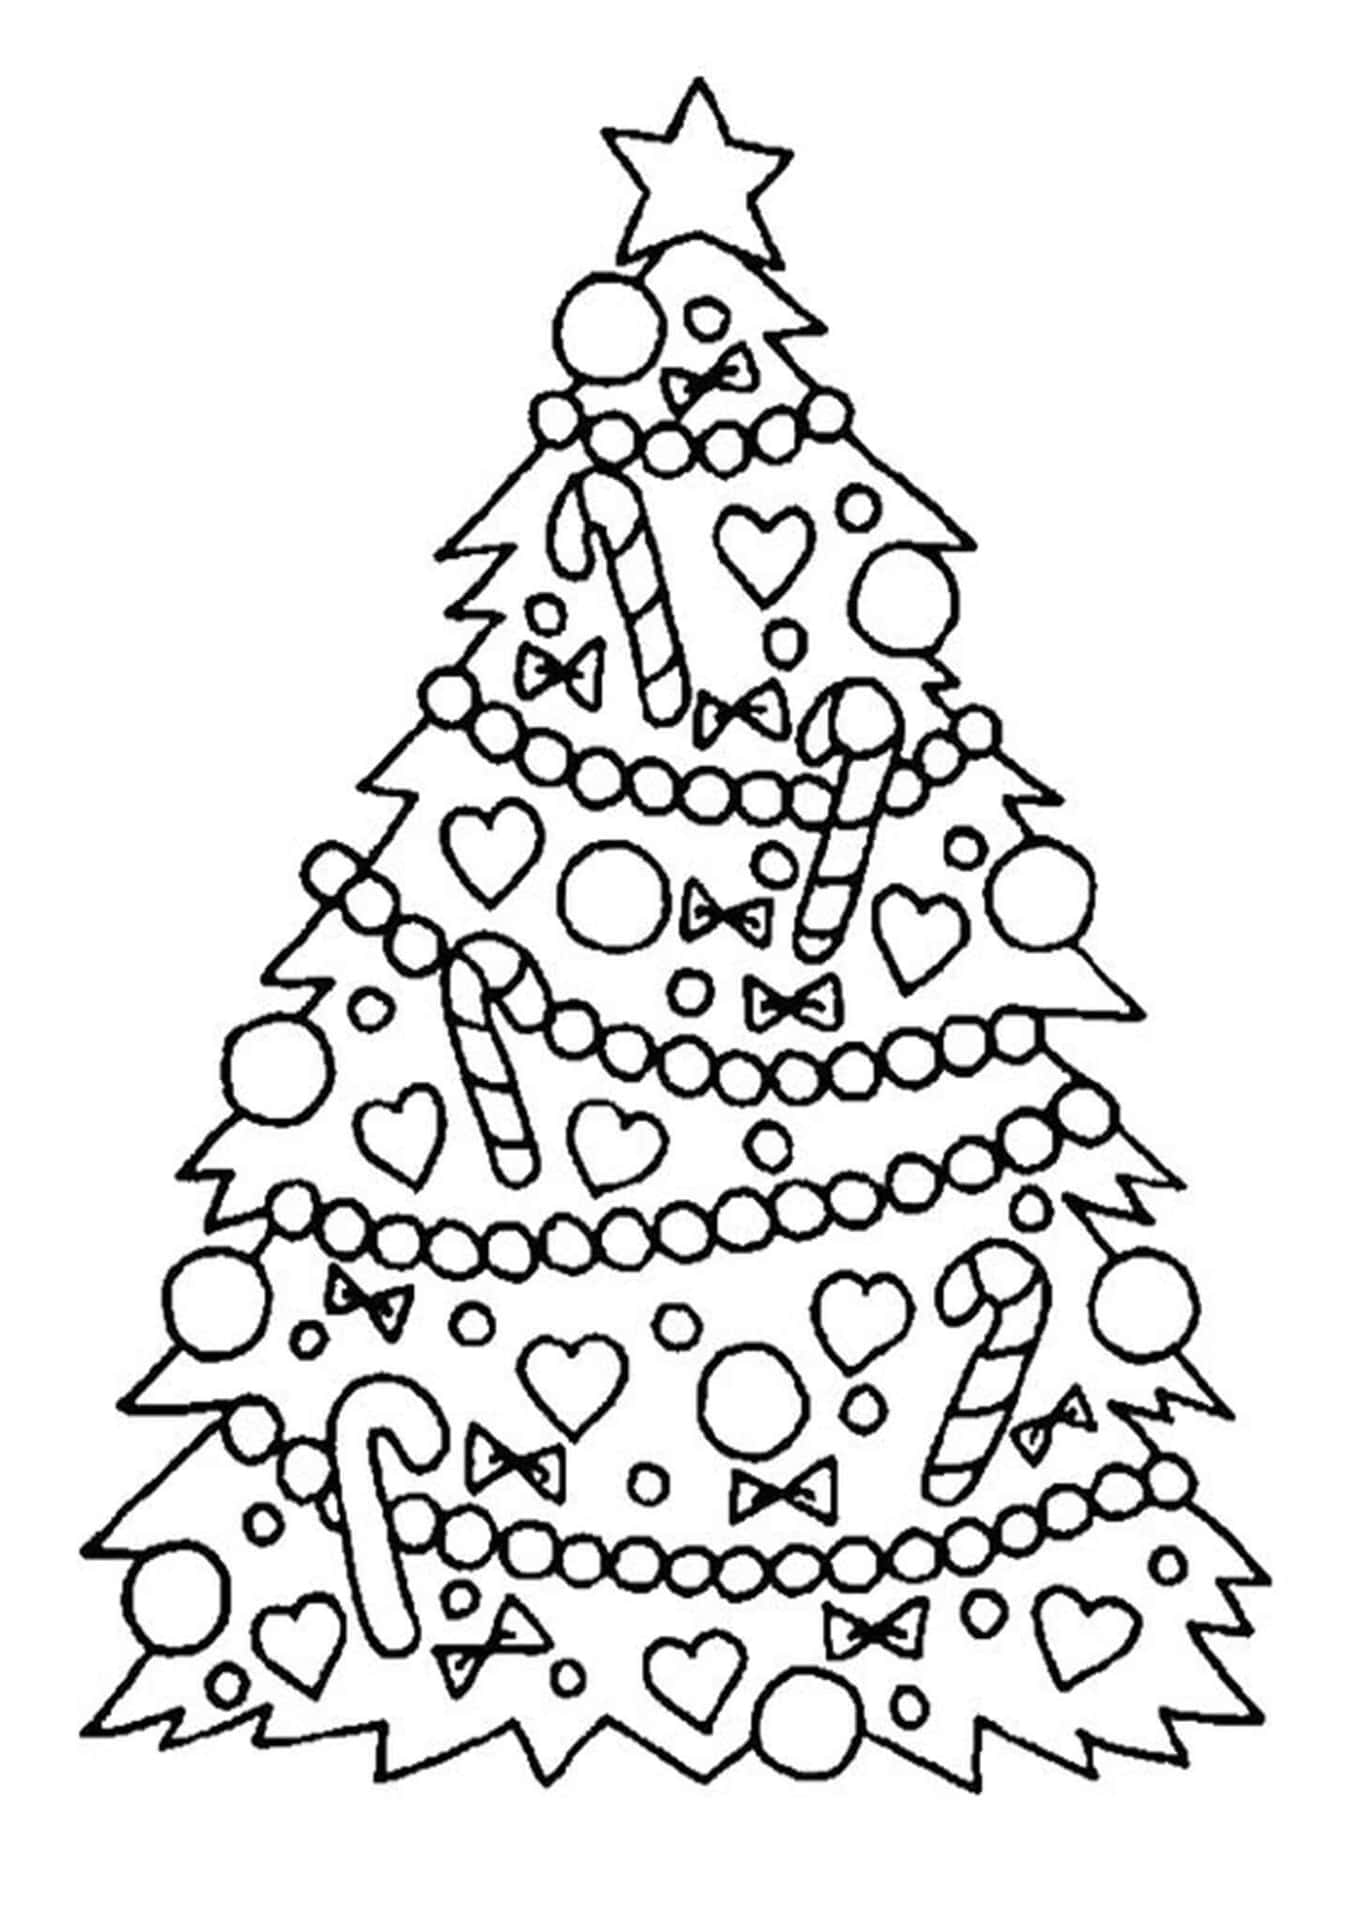 Celebrate the holidays with this wintery themed Christmas Coloring Picture